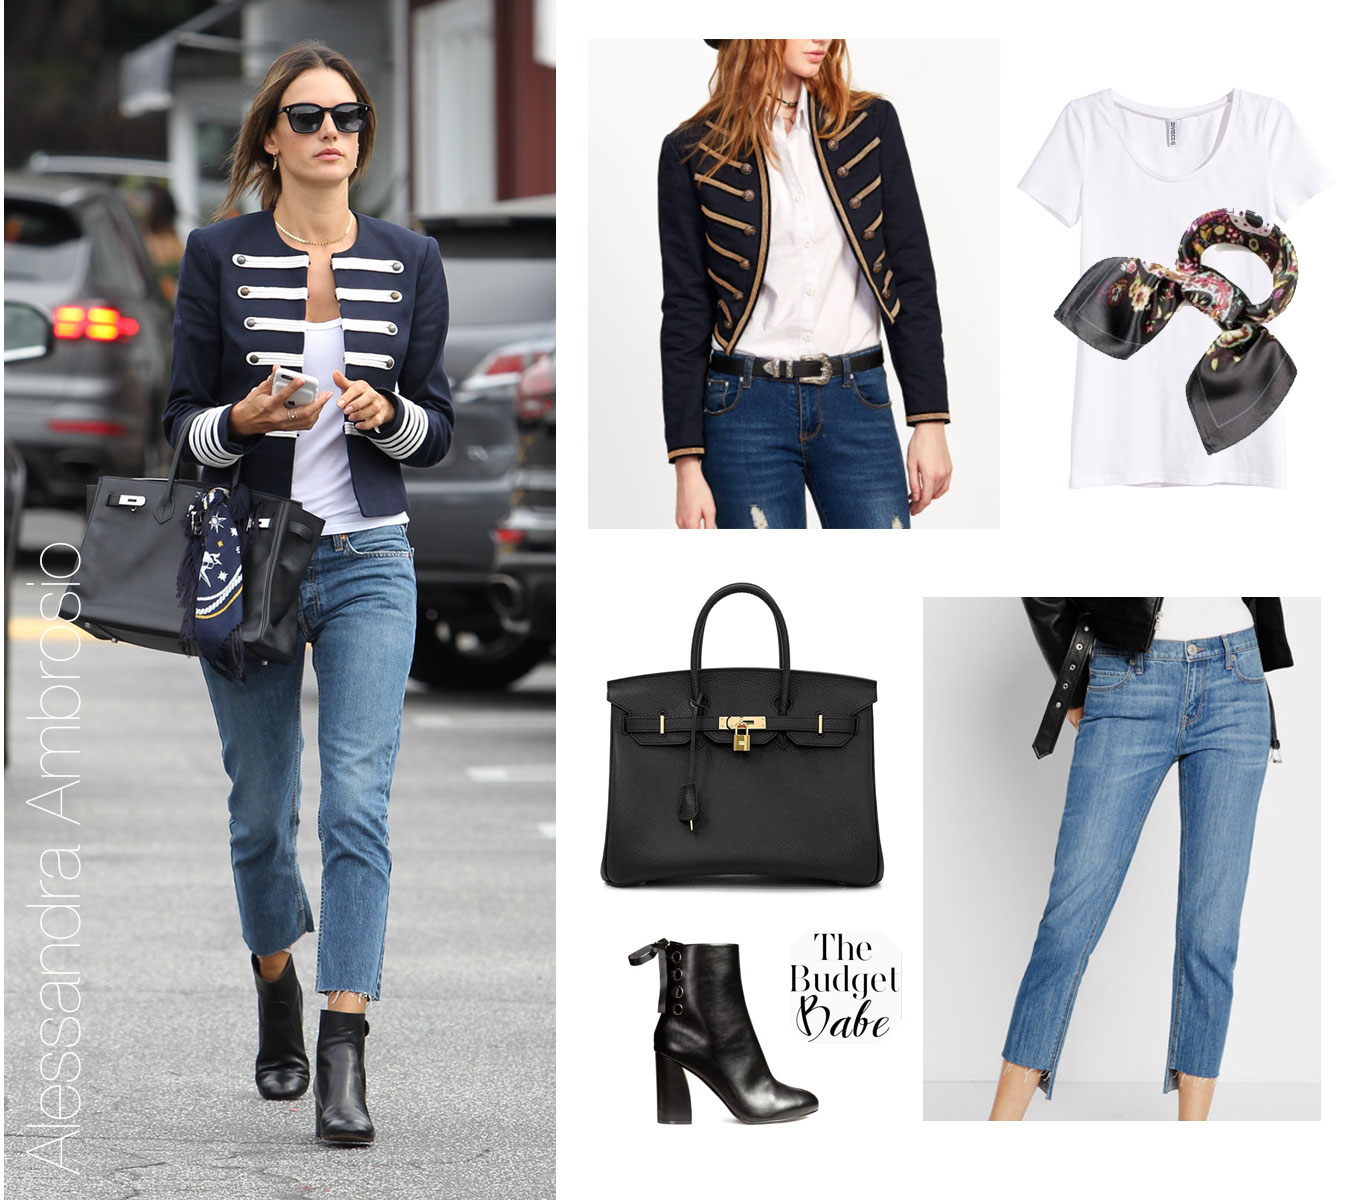 Alessandra Ambrosio wears a military band jacket with fray edge jeans and black ankle boots.